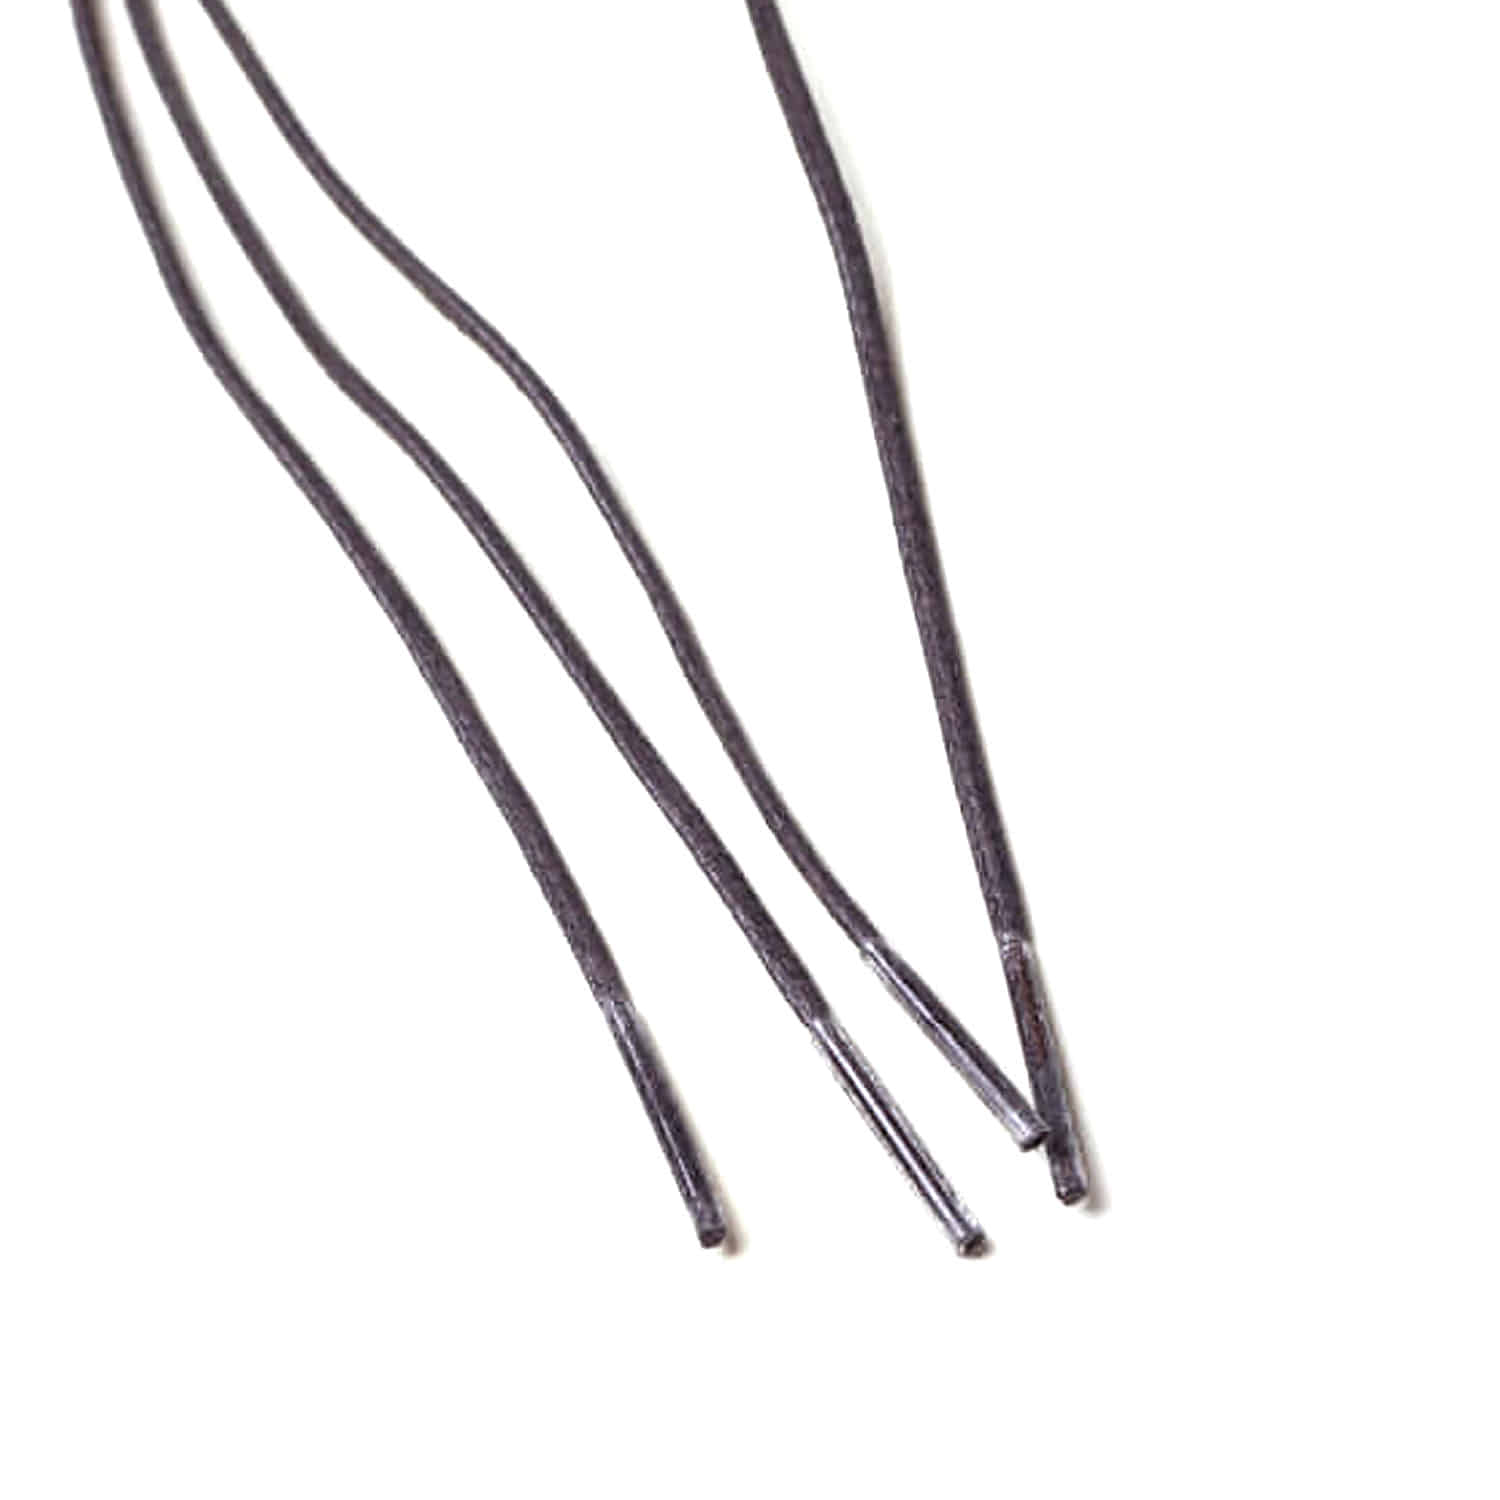 PARLOUR - Round Shoelaces for 5 Eyelets